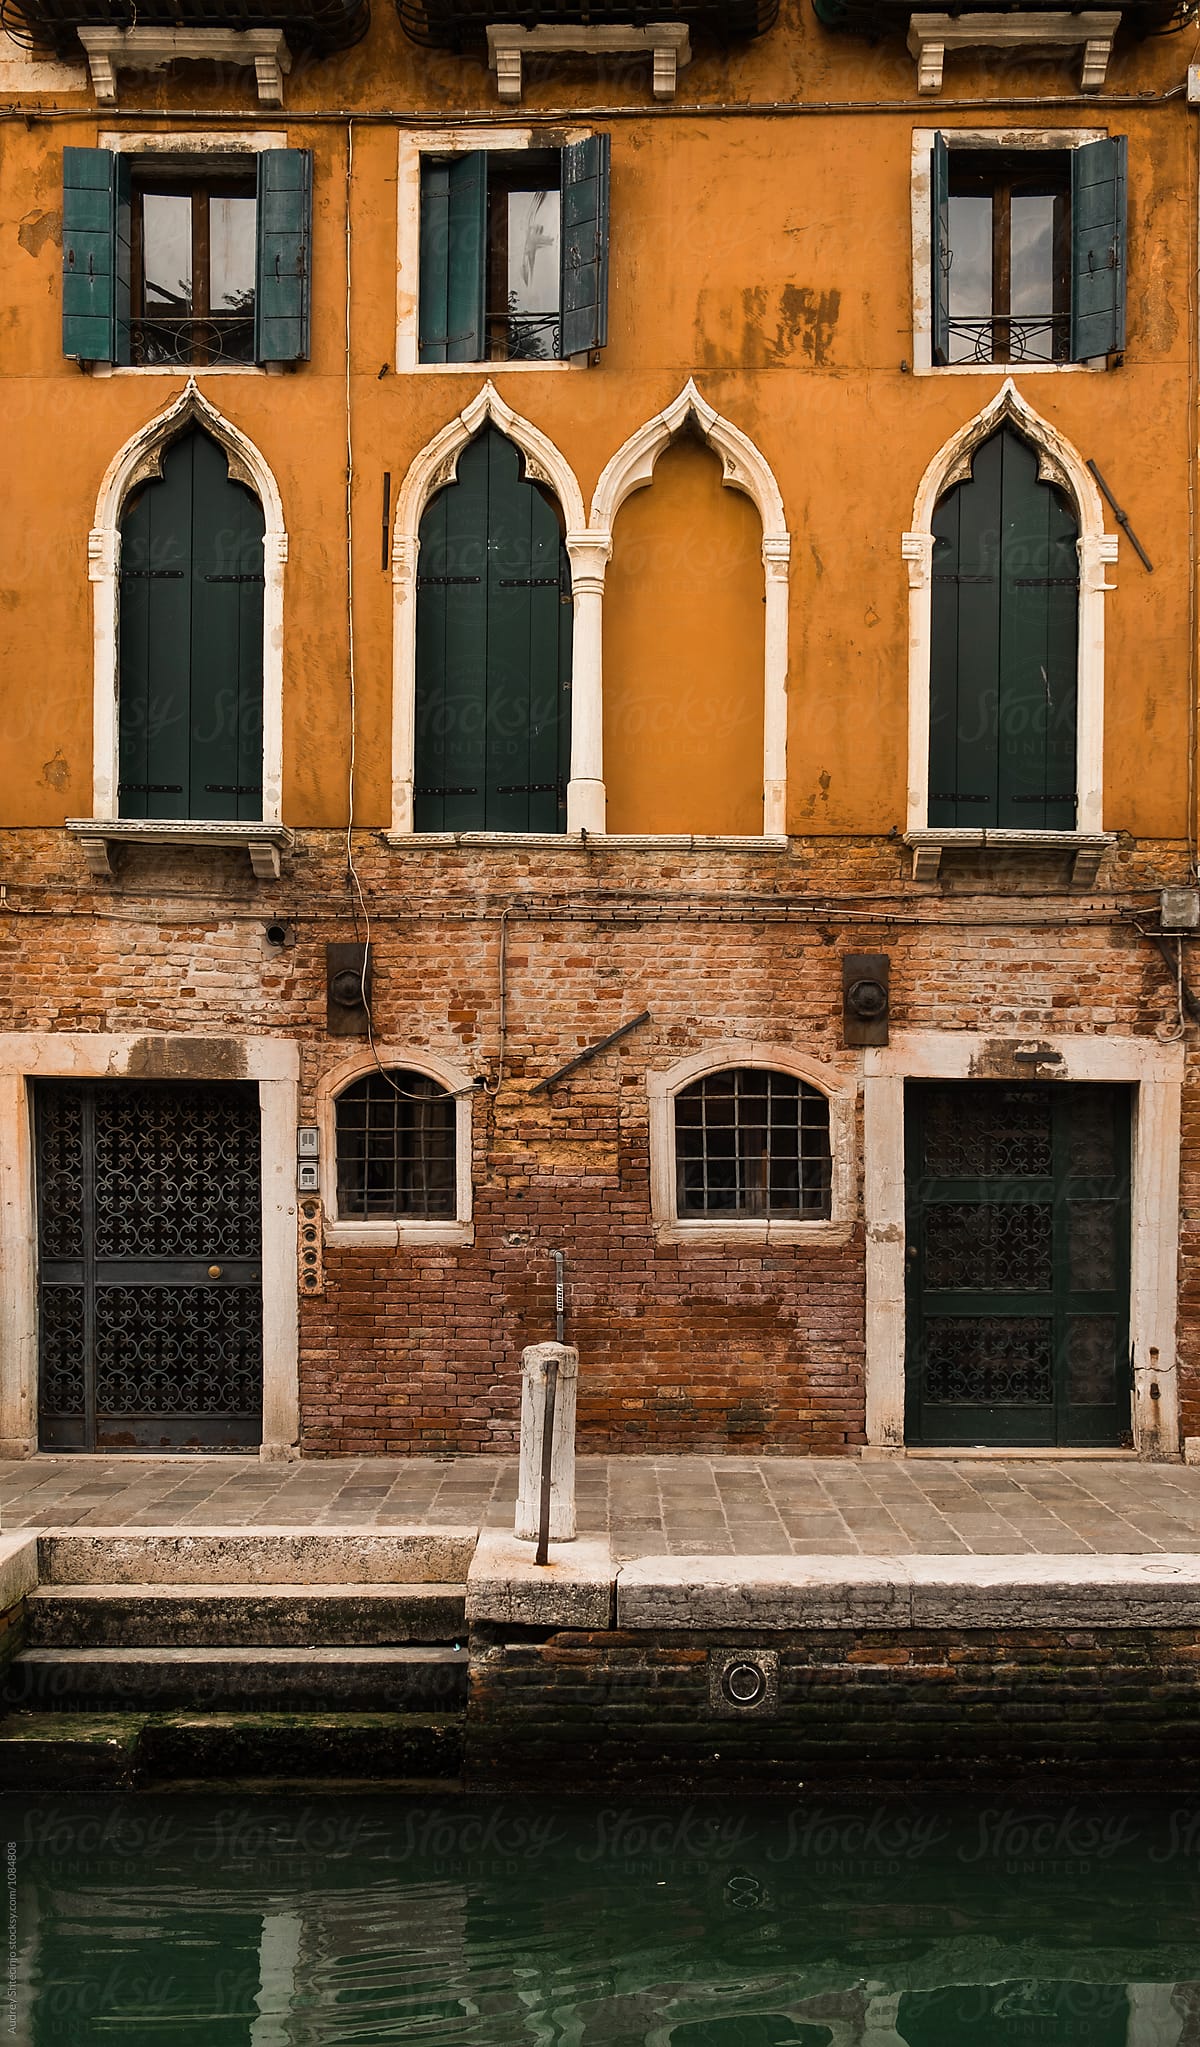 Building with yellow rustic facade with water canal in front of it. Venice/Italy